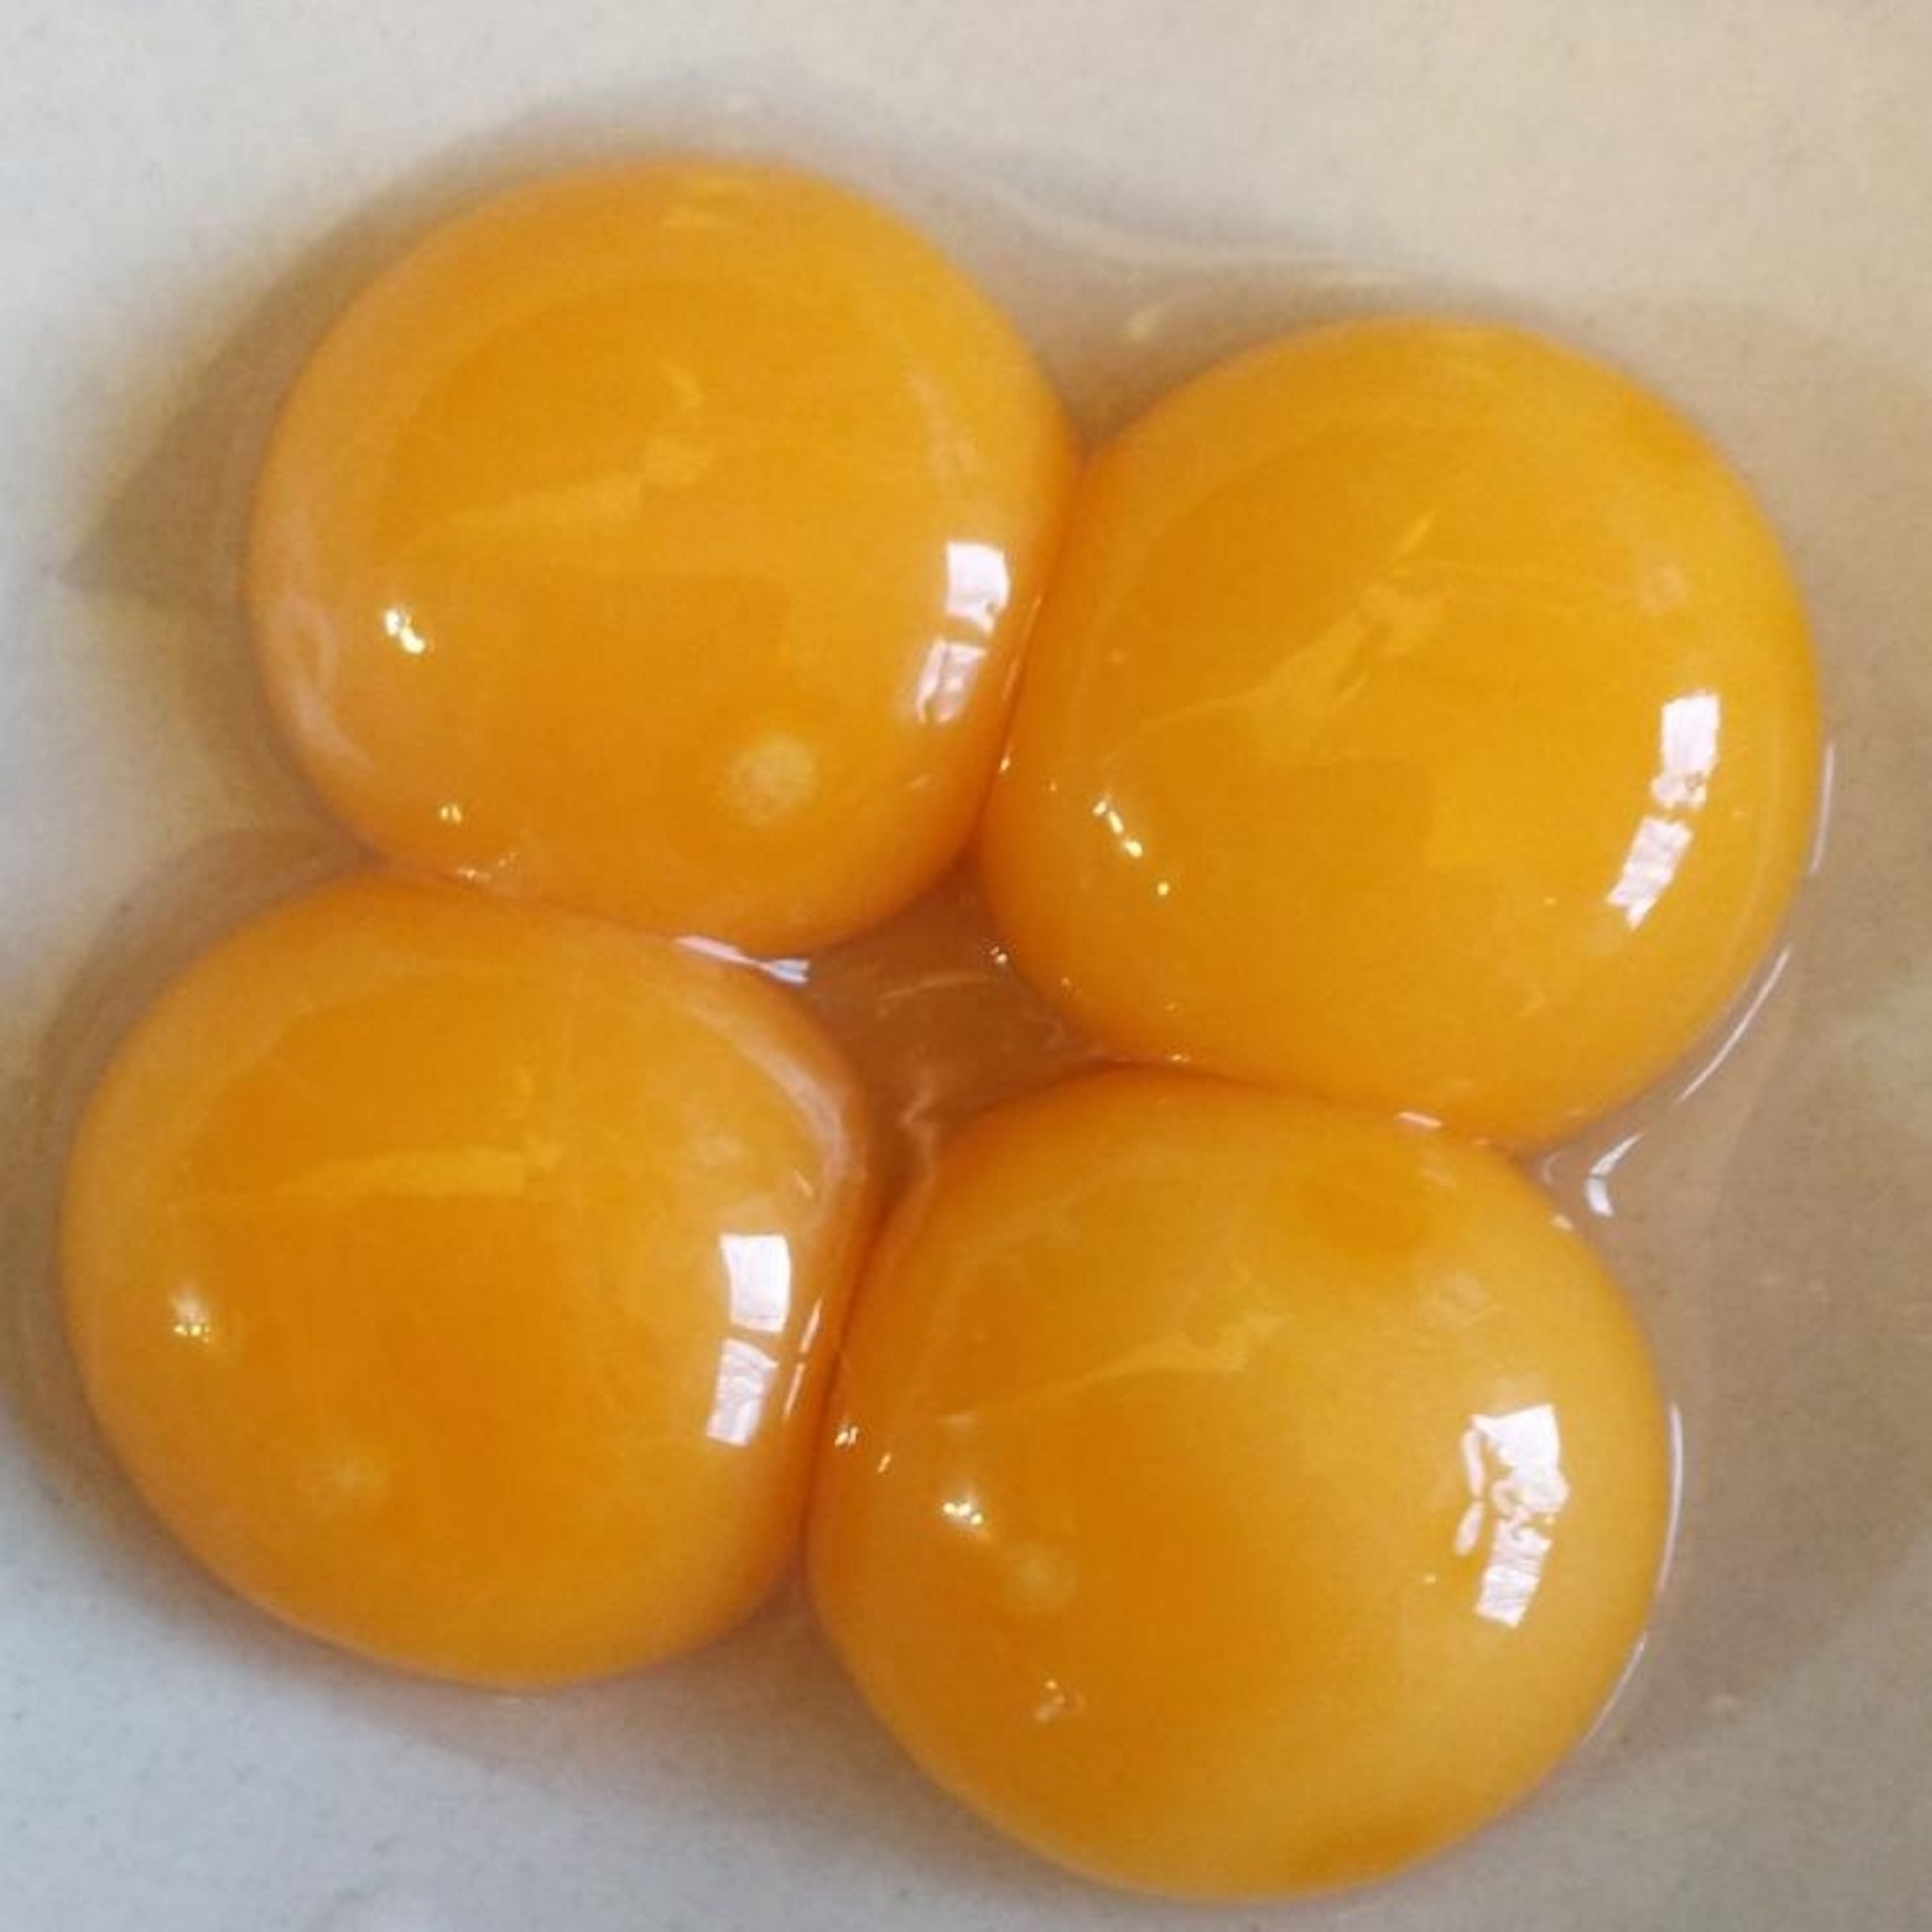 Separate the eggs, and bring a pan of water to a gentle simmer over a low heat. Slowly place the egg yolks in the water one by one, and simmer for 30-40 seconds or until the outside has solidified and the inside seems soft. Place on a plate lined with paper towels to drain off any excess liquid. Sprinkle with sea salt whilst they are still warm.